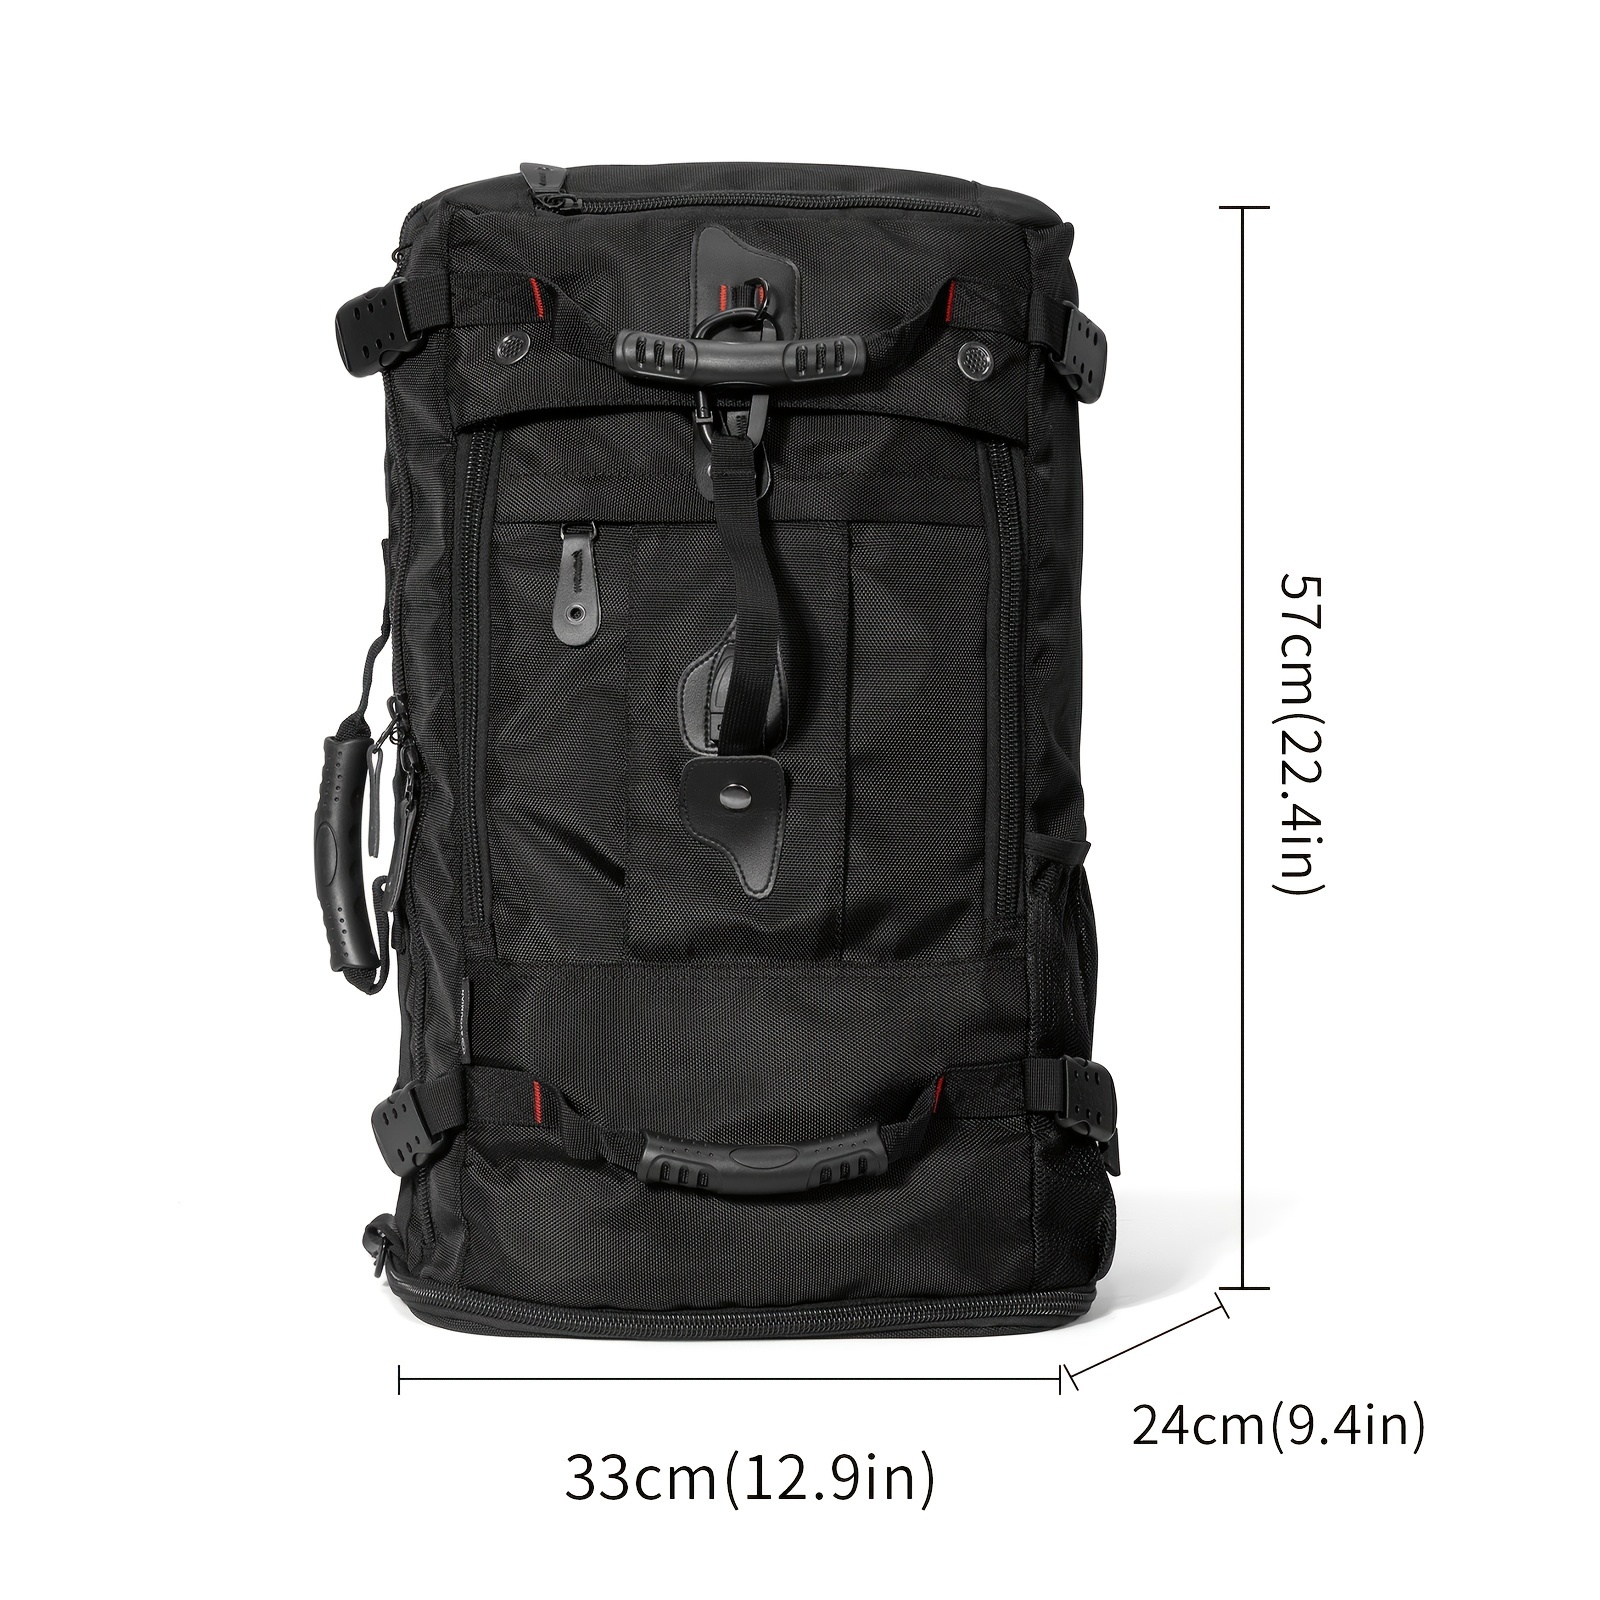 Travel Backpack for Men & Women - 15.6 inch Laptop Bag - Airplane & Hiking Use - Convertible Three Way